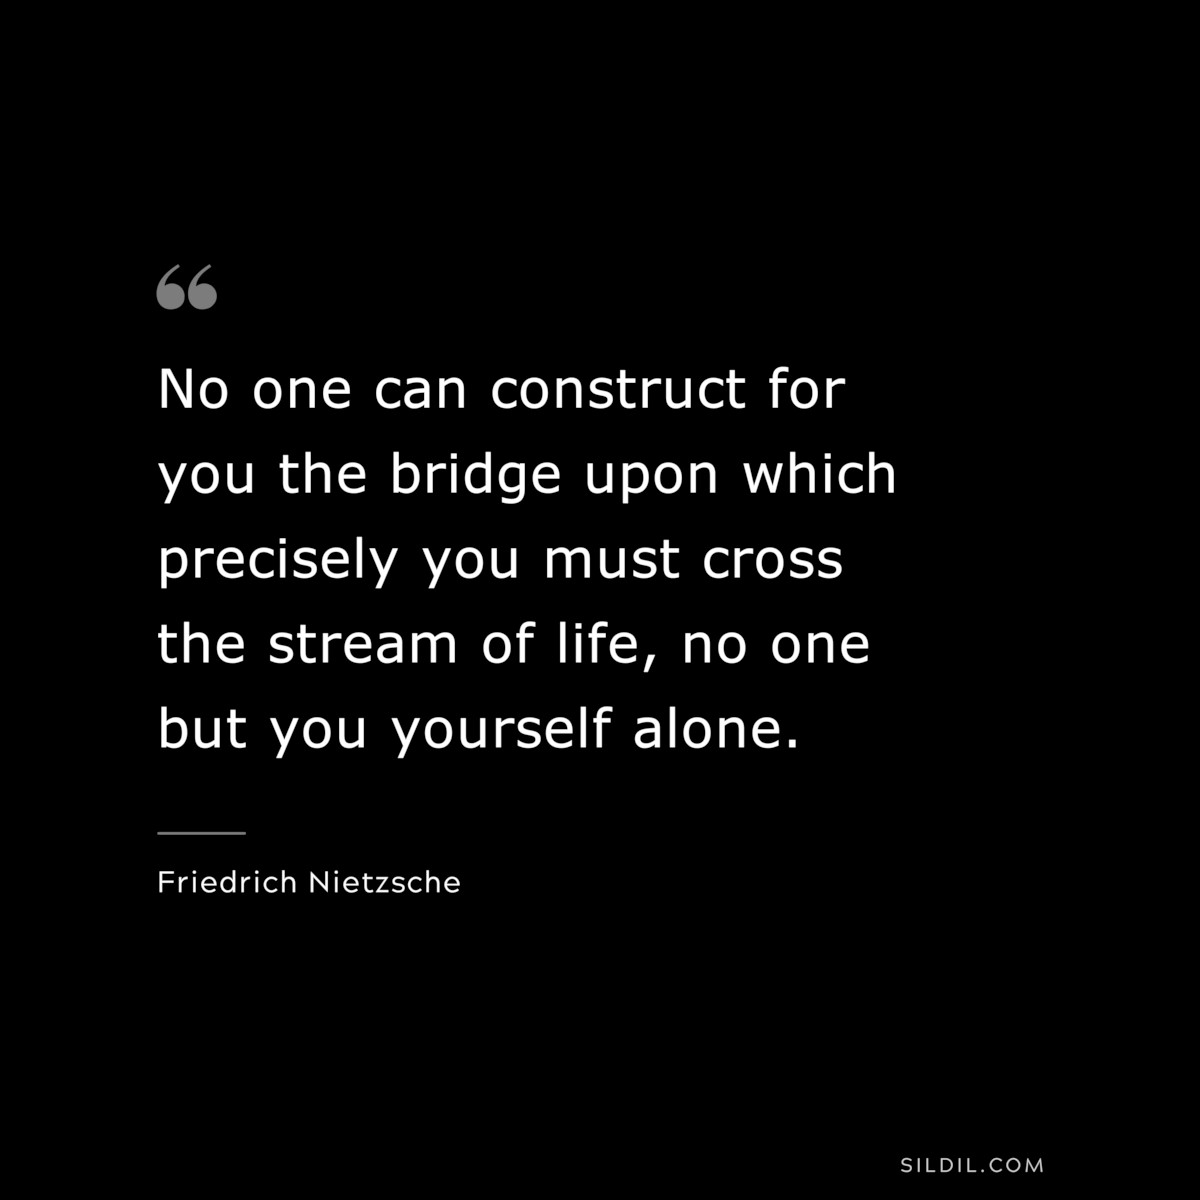 No one can construct for you the bridge upon which precisely you must cross the stream of life, no one but you yourself alone. ― Friedrich Nietzsche